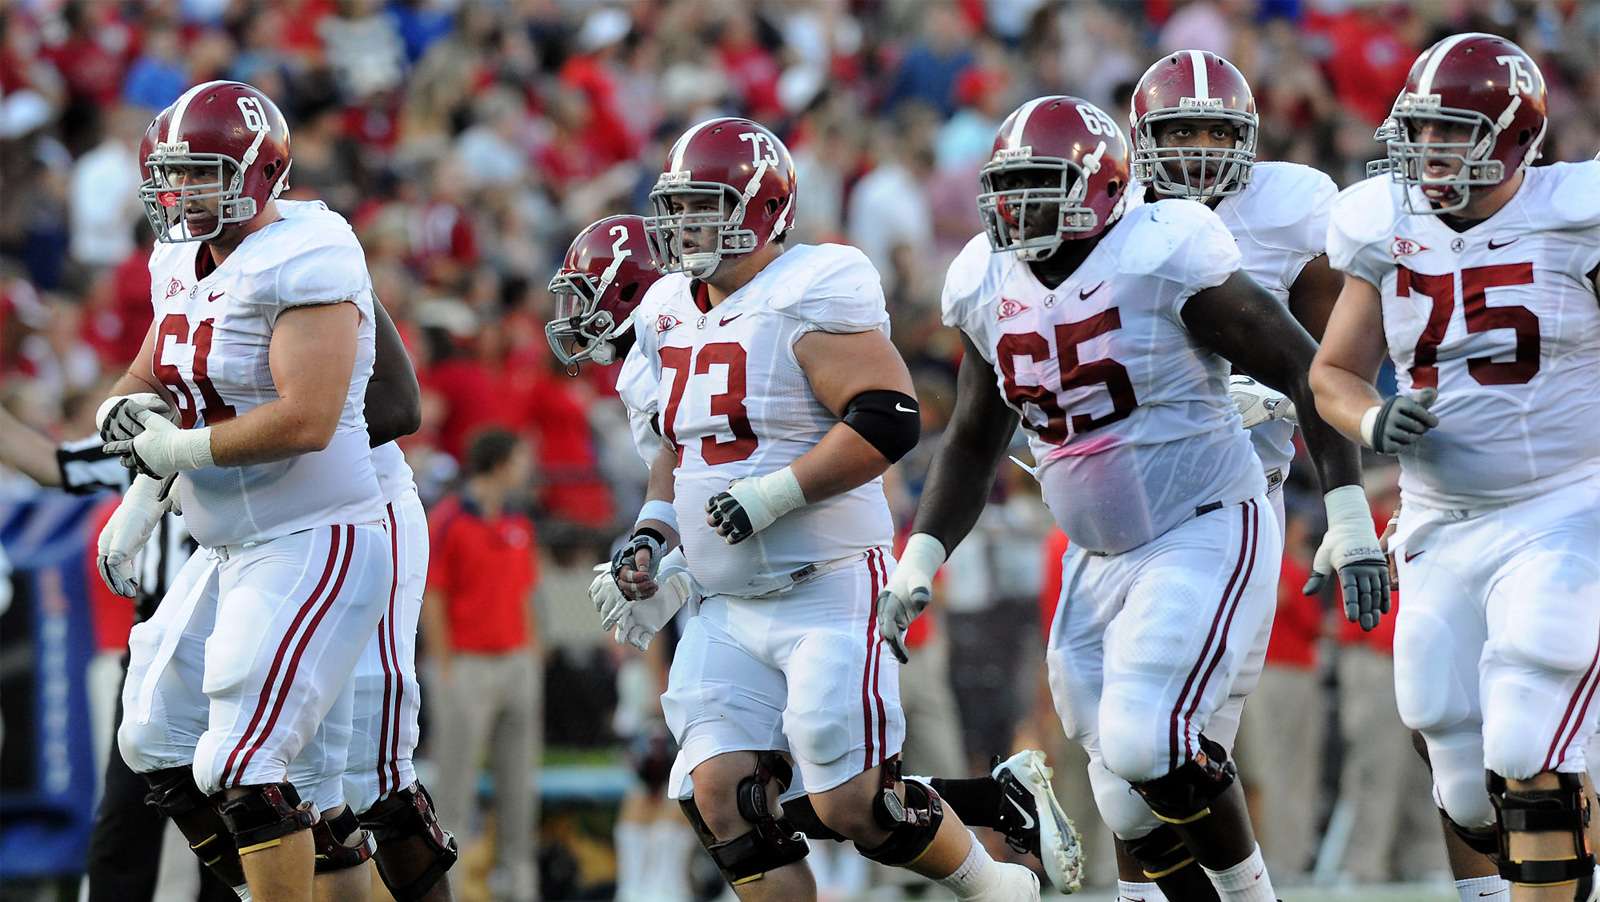 Alabama’s Experience Provides Edge in All-SEC National Title Game